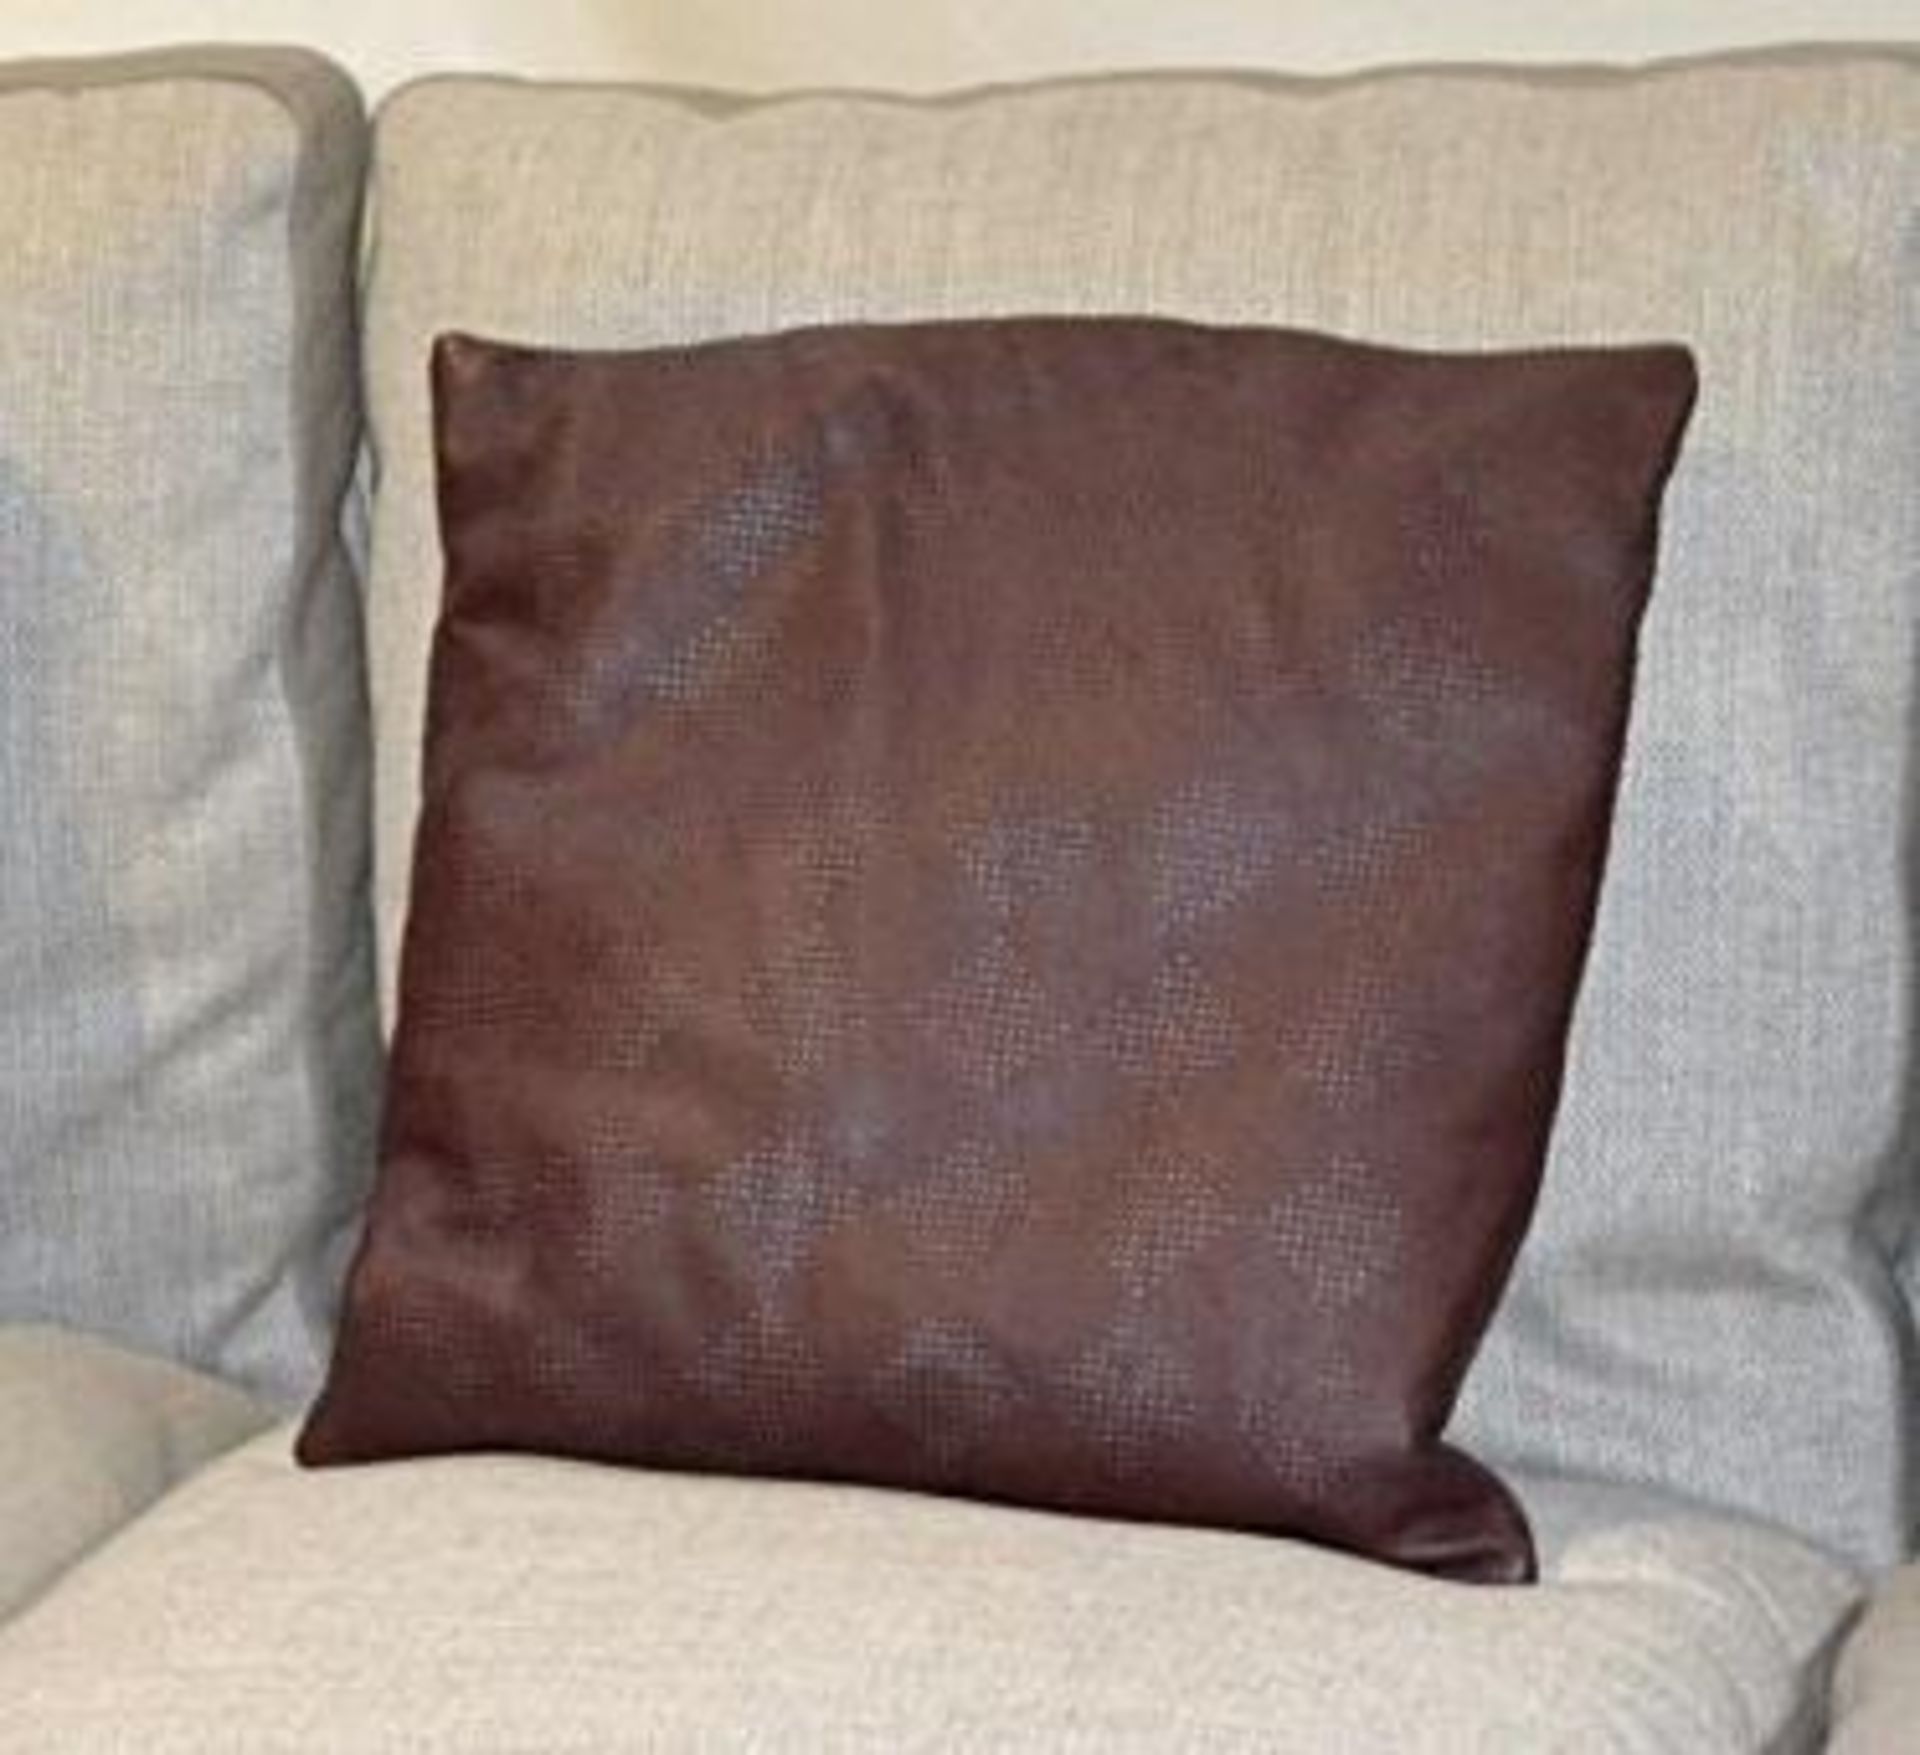 3 x POLTRONA FRAU&nbsp;Goose Down Scatter Cushions In A Burgundy Leather With A Diamond Motif - Dime - Image 2 of 4